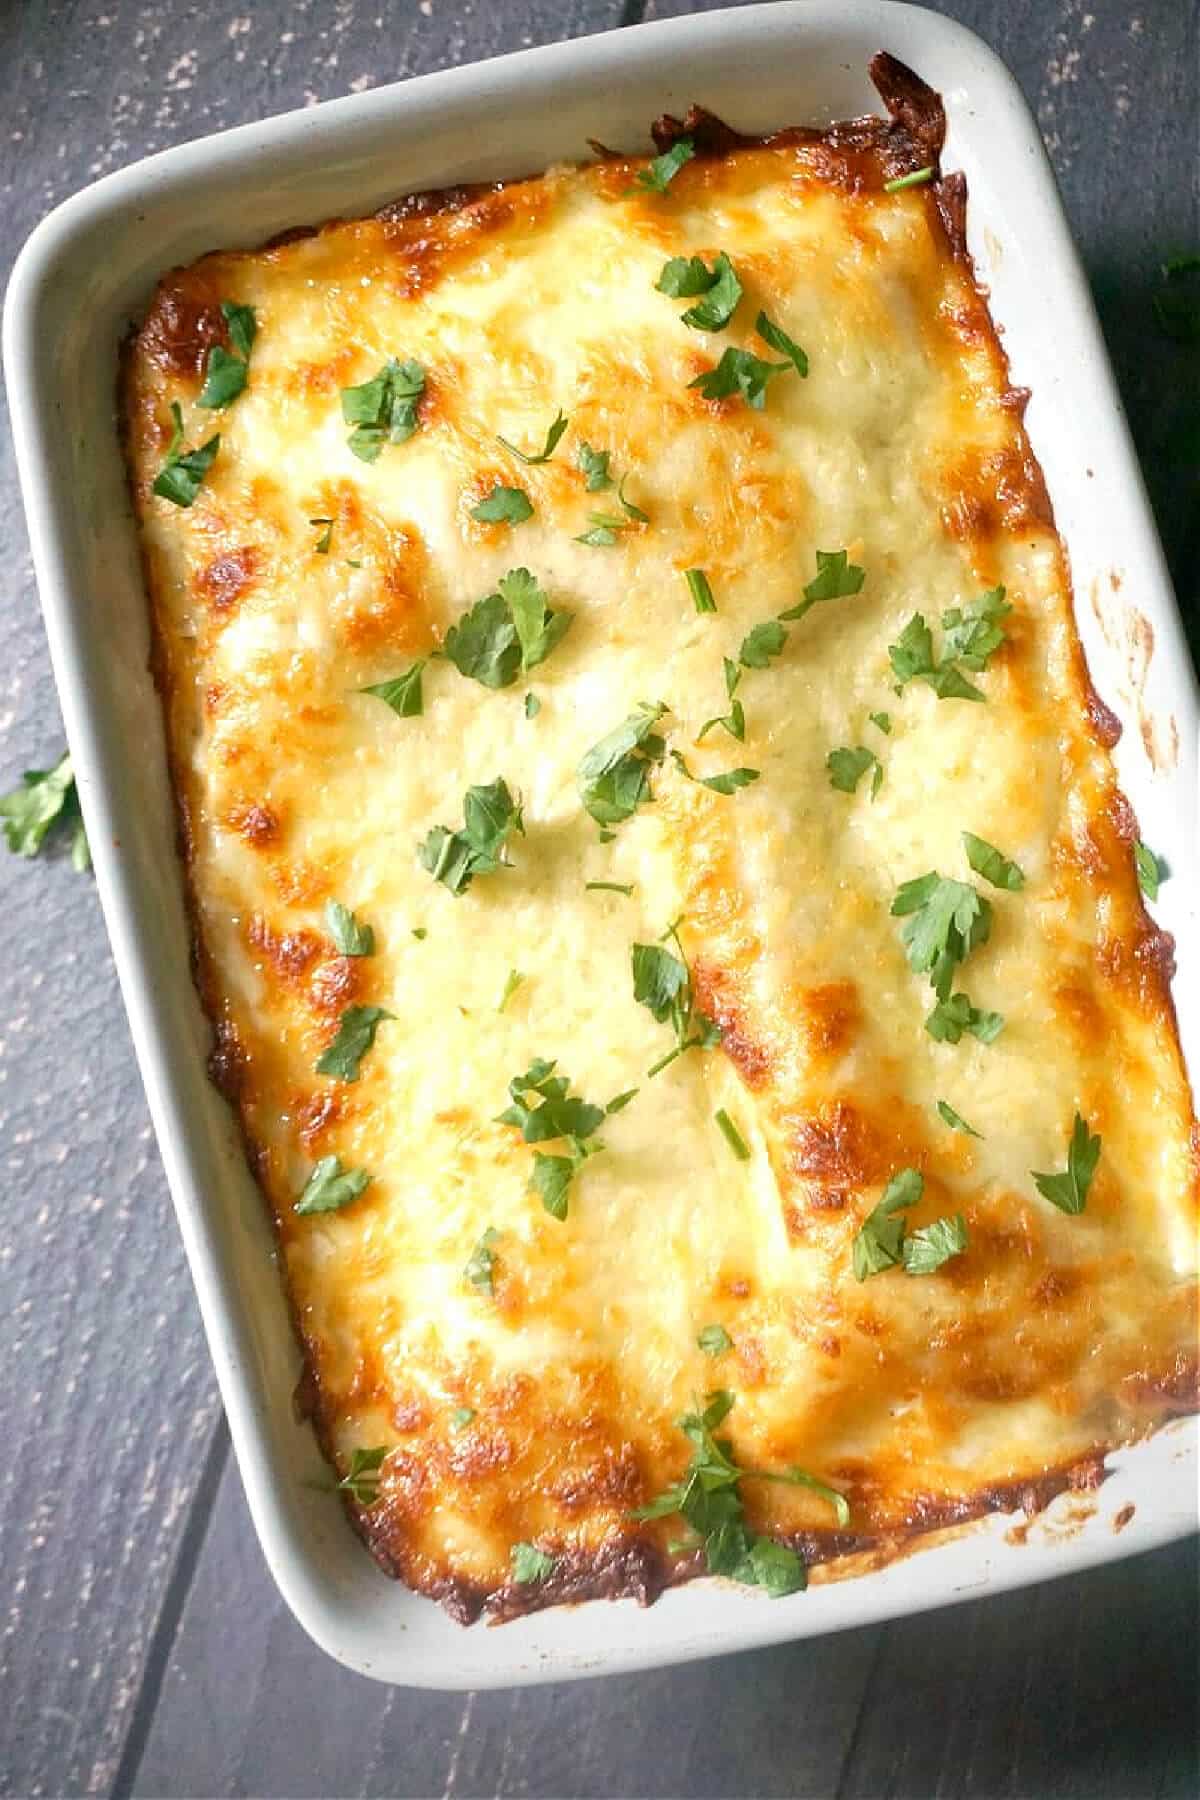 A dish with lasagna and fresh parsley leaves over.